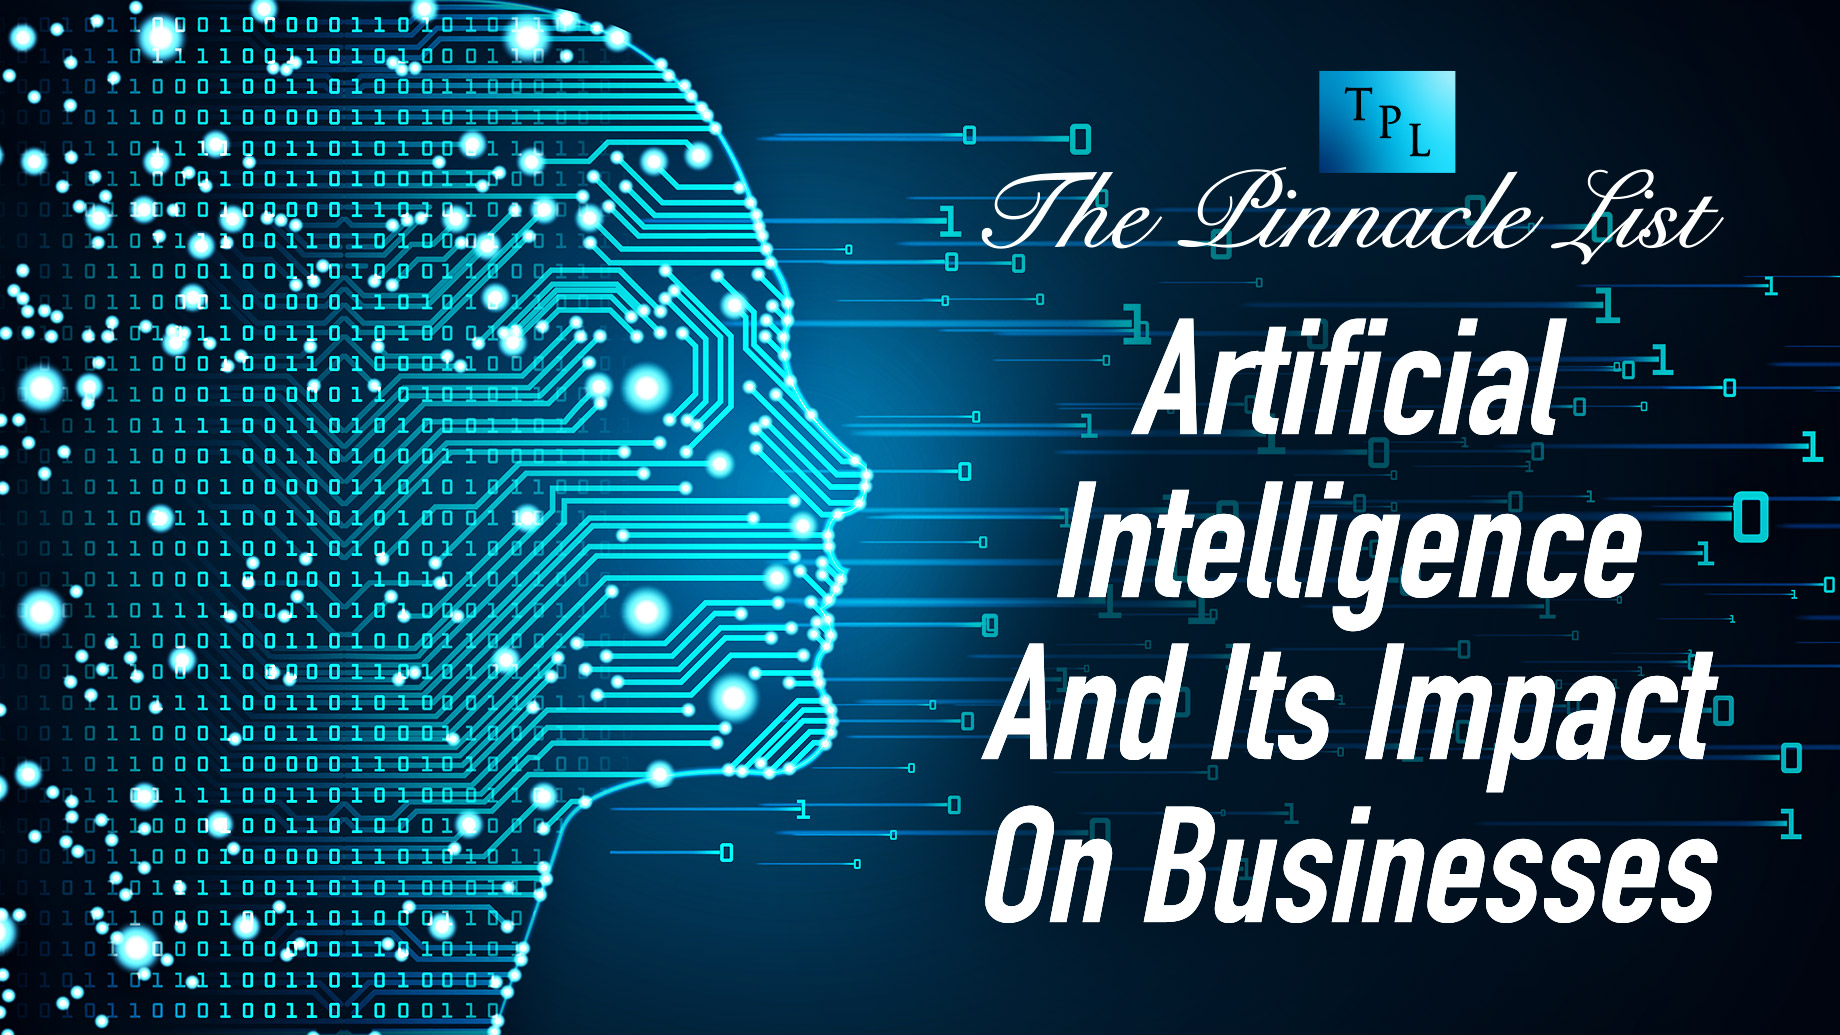 Artificial Intelligence And Its Impact On Businesses